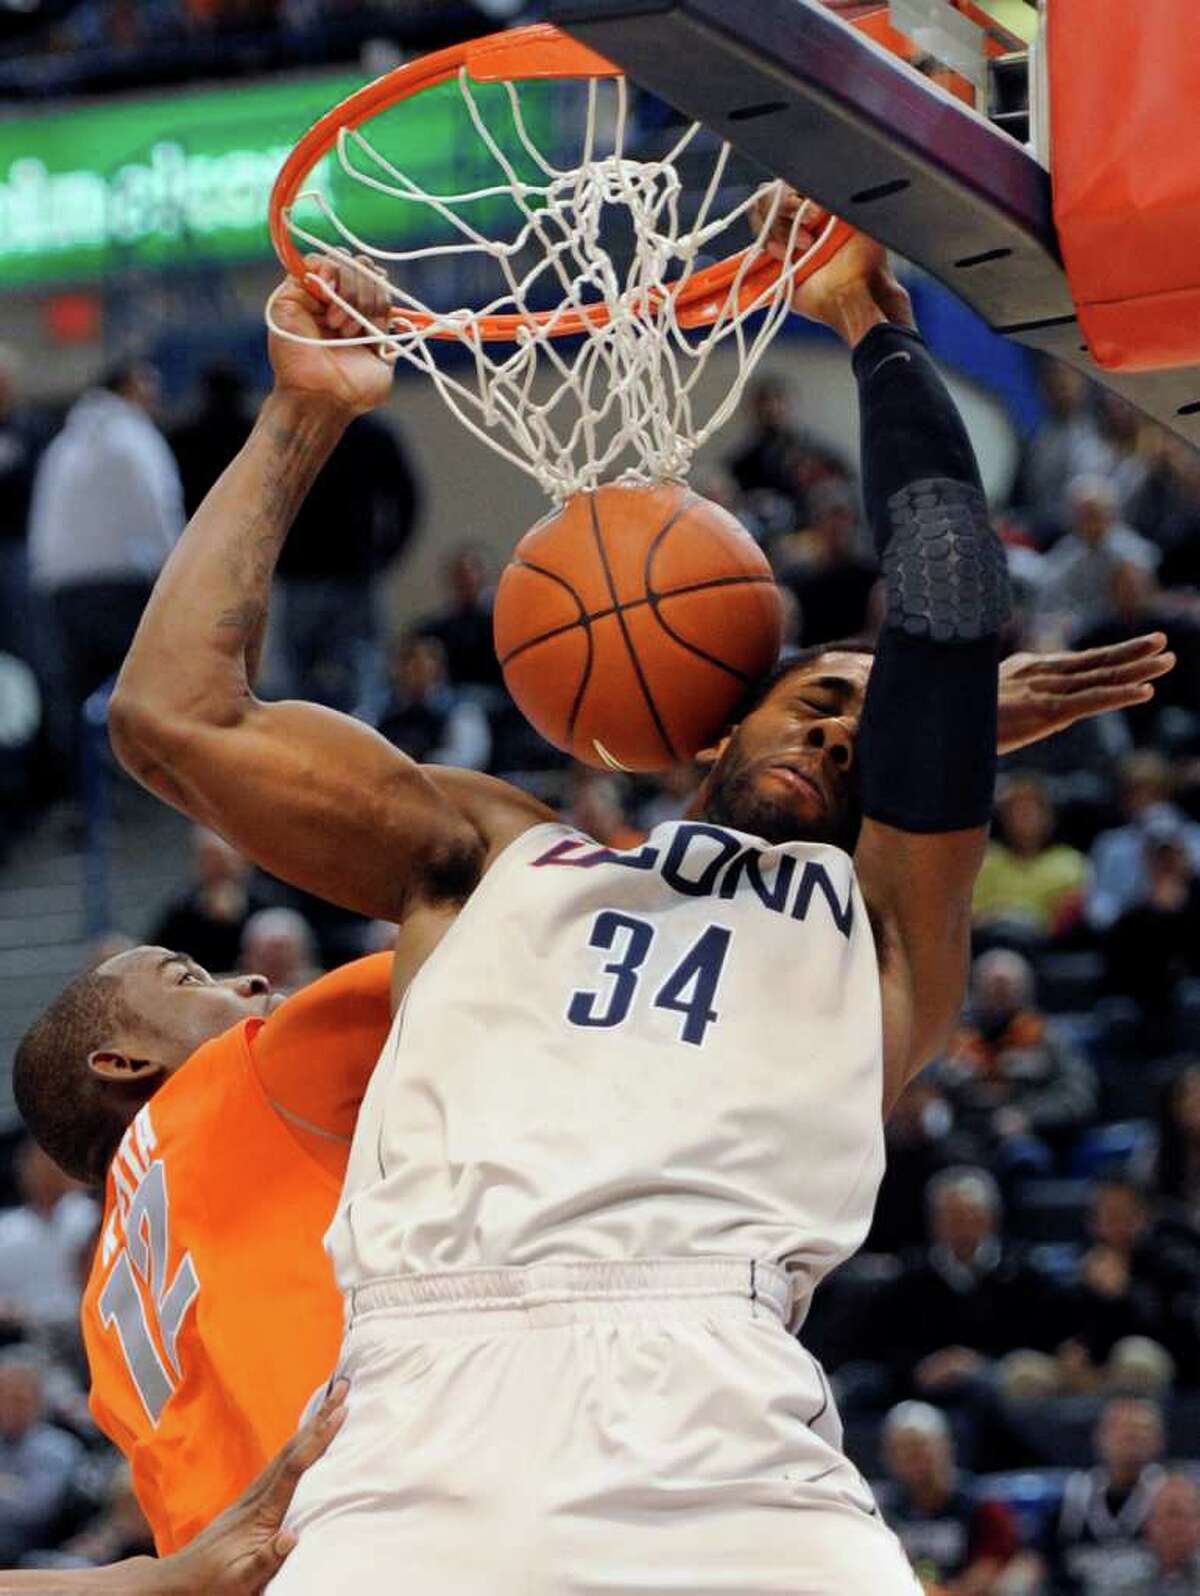 Connecticut's Alex Oriakhi dunks the ball while guarded by Syracuse's Baye Moussa Keita during the first half of an NCAA college basketball game in Hartford, Conn., Wednesday, Feb. 2, 2011. (AP Photo/Jessica Hill)